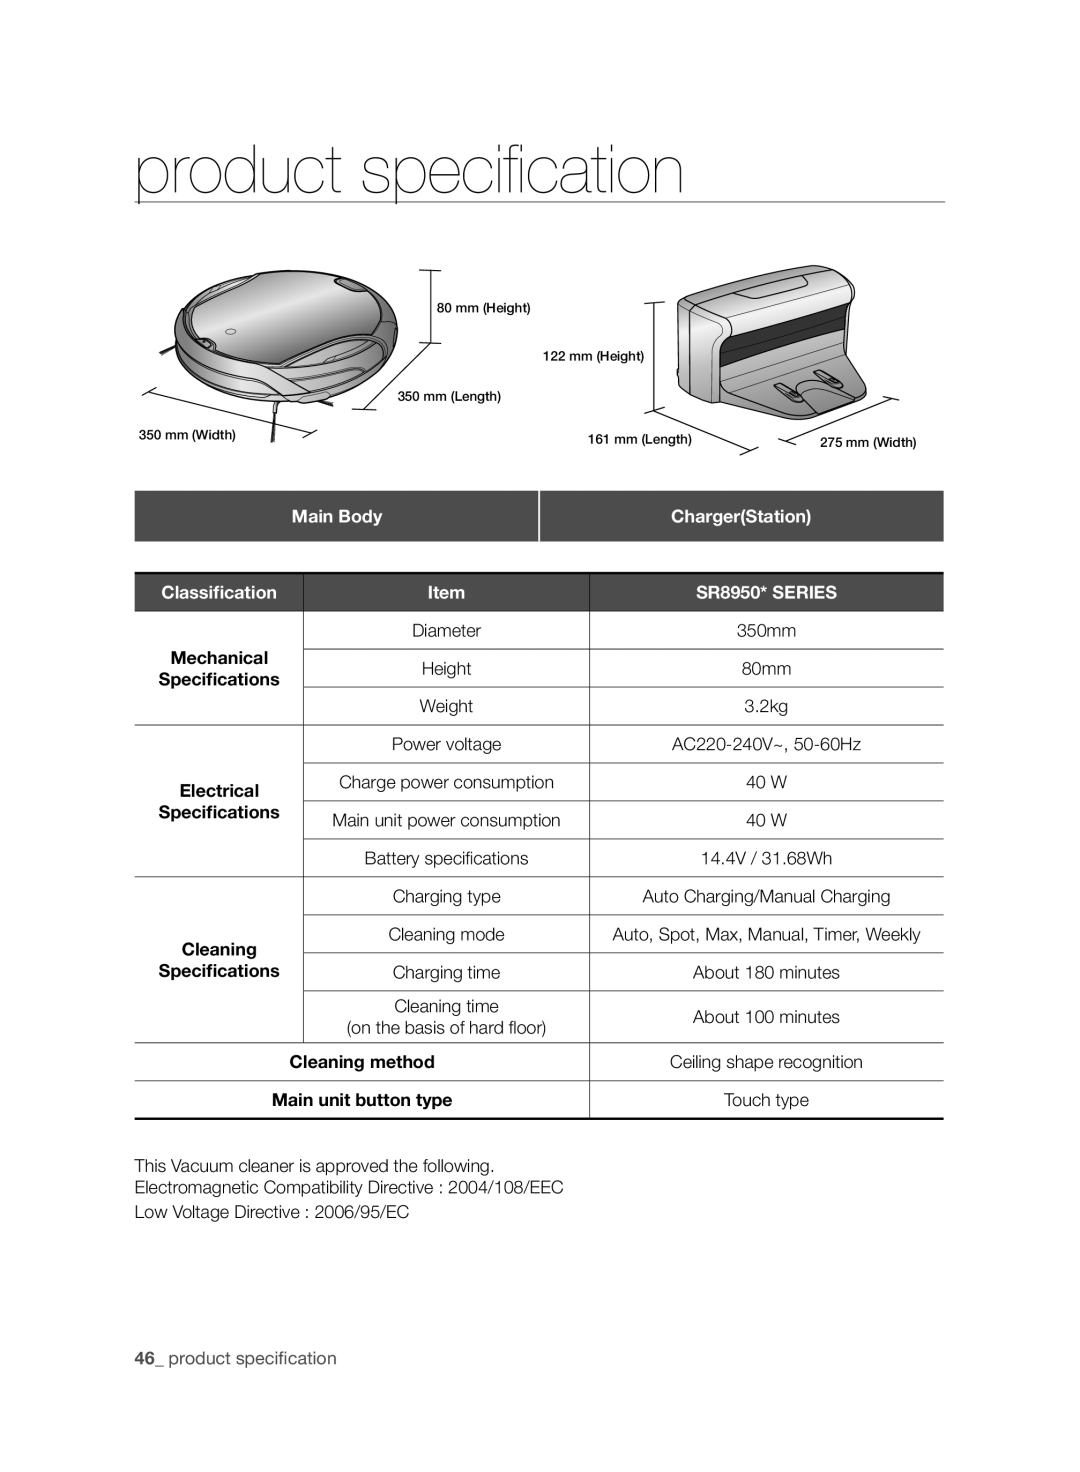 Samsung VCR8950L3B/XEO product speciﬁ cation, Main Body, ChargerStation, Classiﬁcation, SR8950* SERIES, Speciﬁcations 